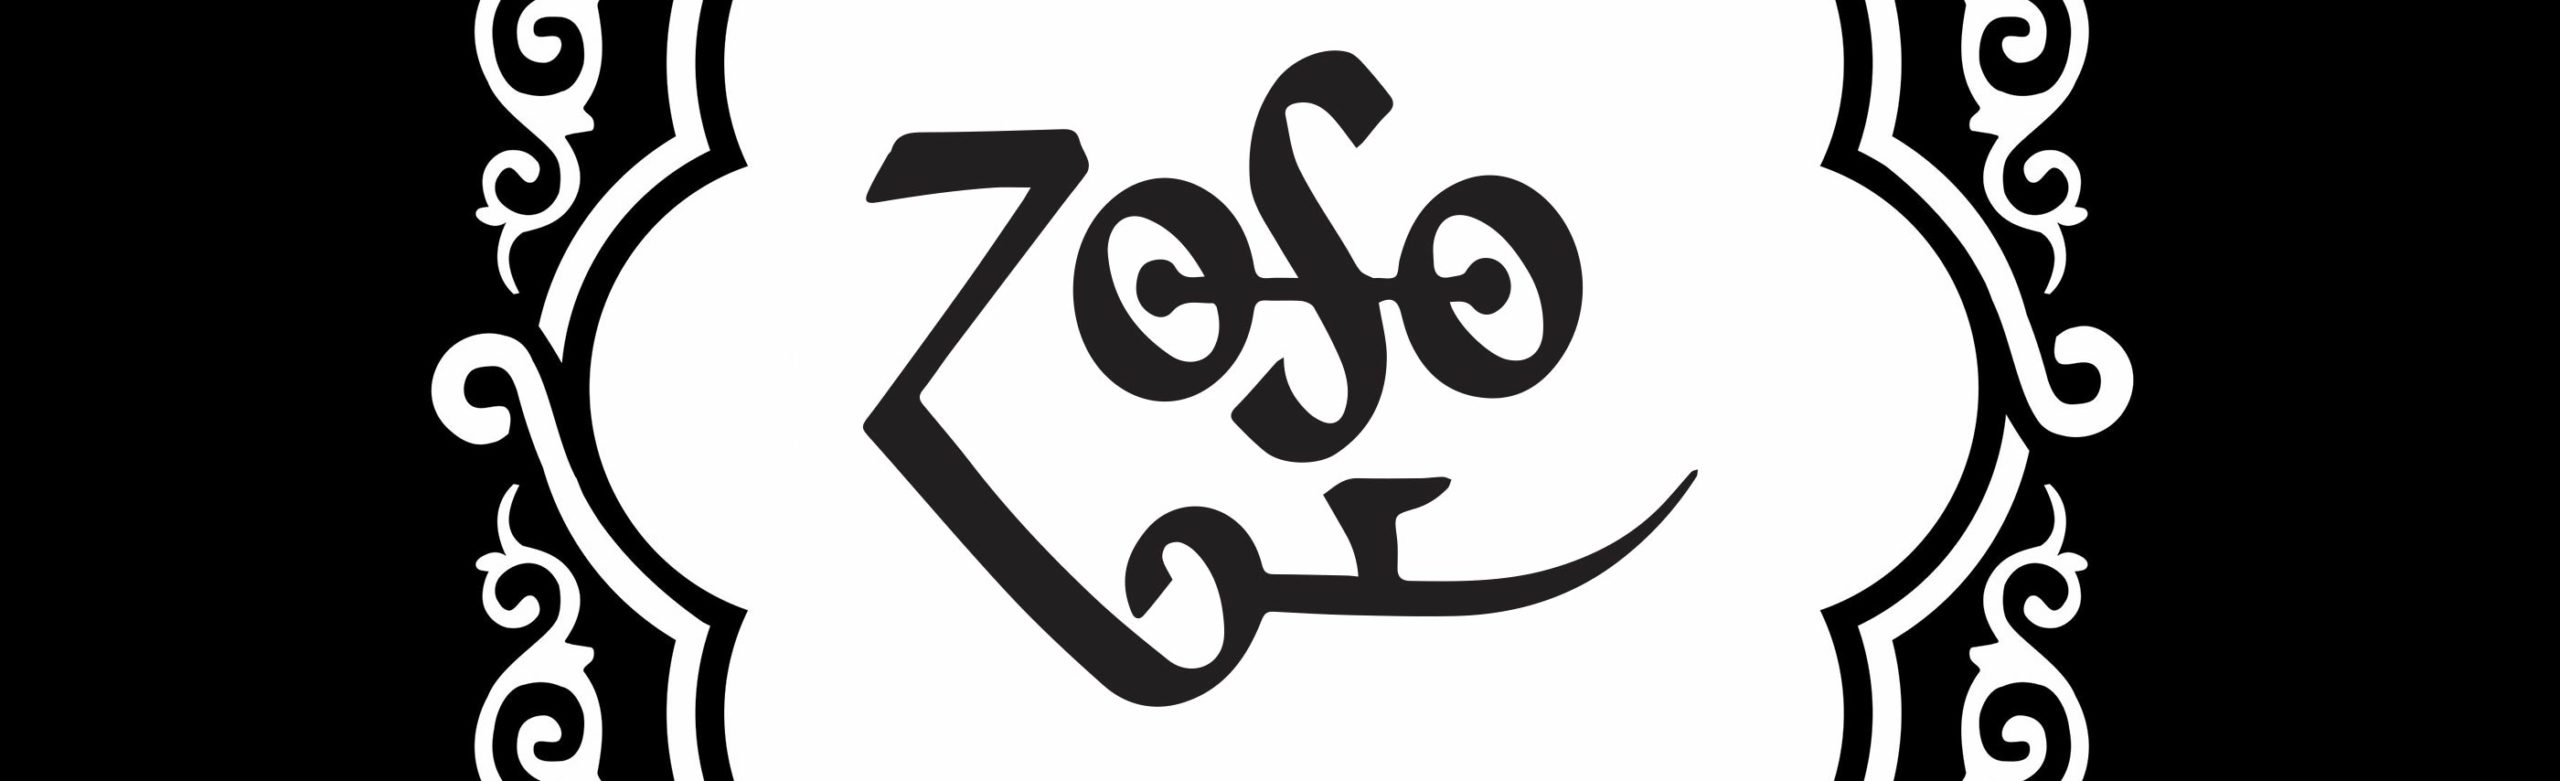 Zoso: A Tribute To Led Zeppelin